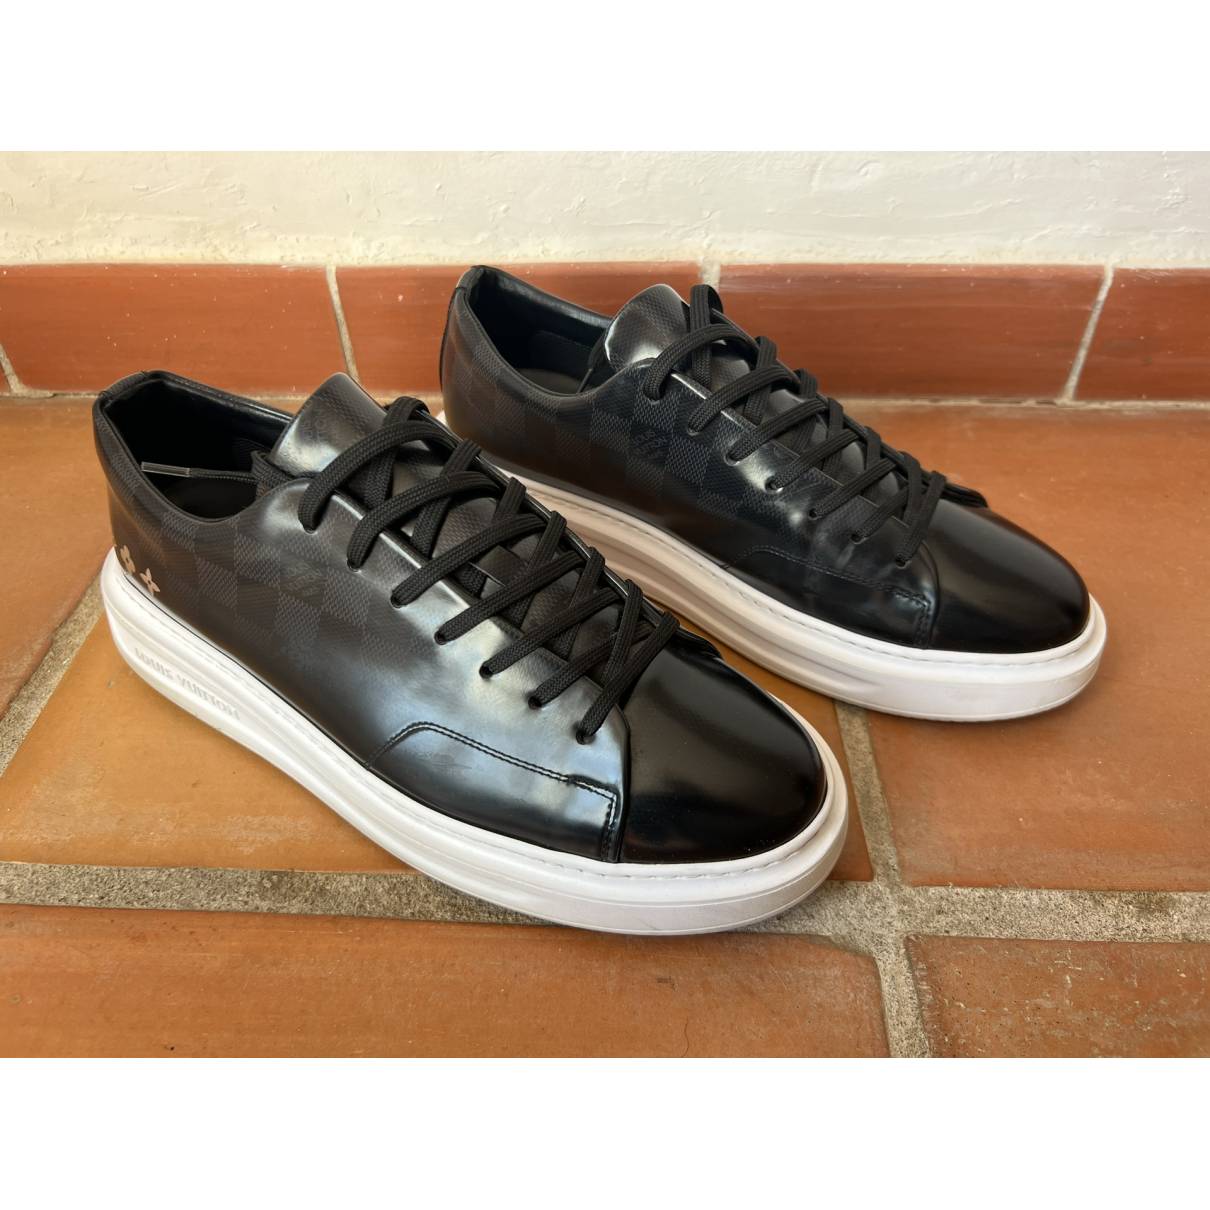 Beverly hills leather low trainers Louis Vuitton Black size 43 EU